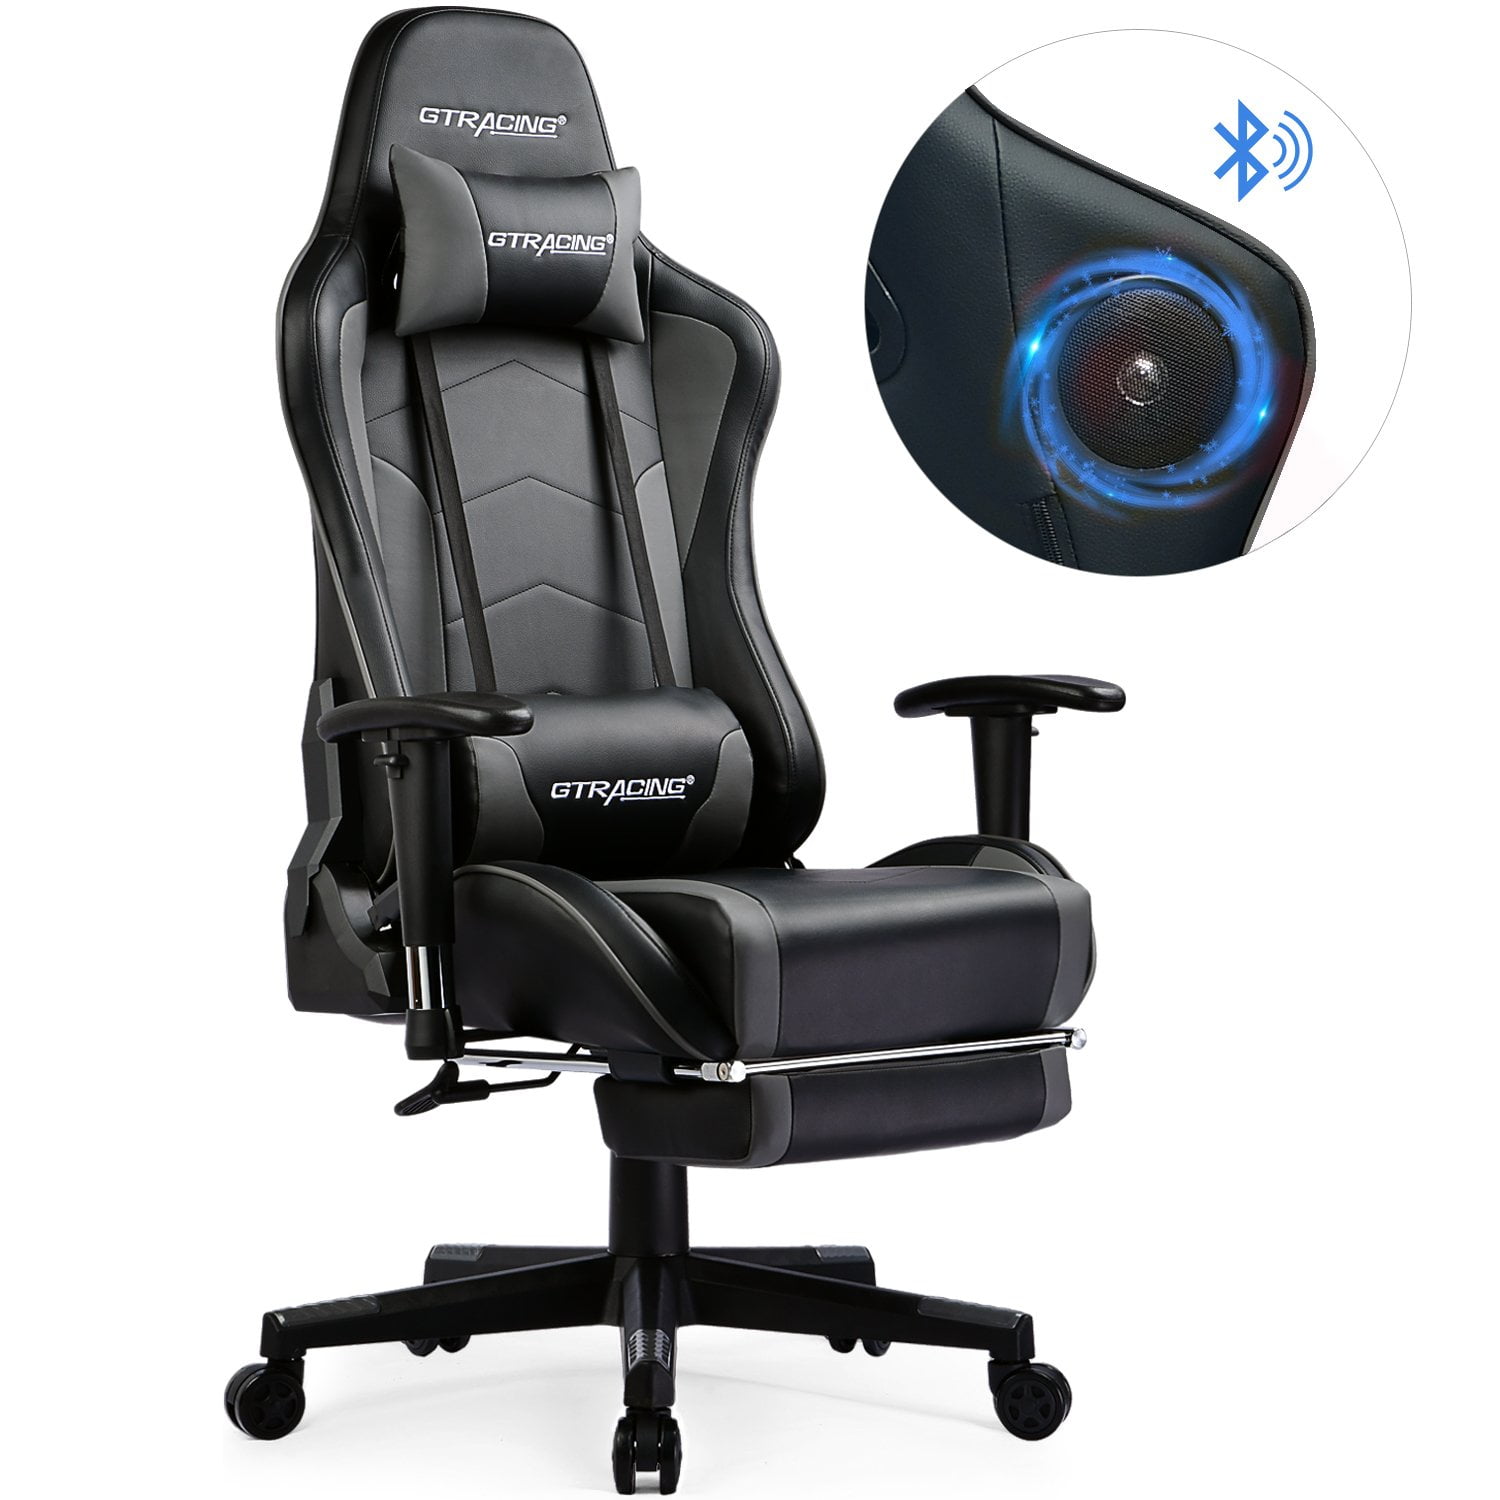 Simple Game Chair With Speakers At Walmart for Simple Design